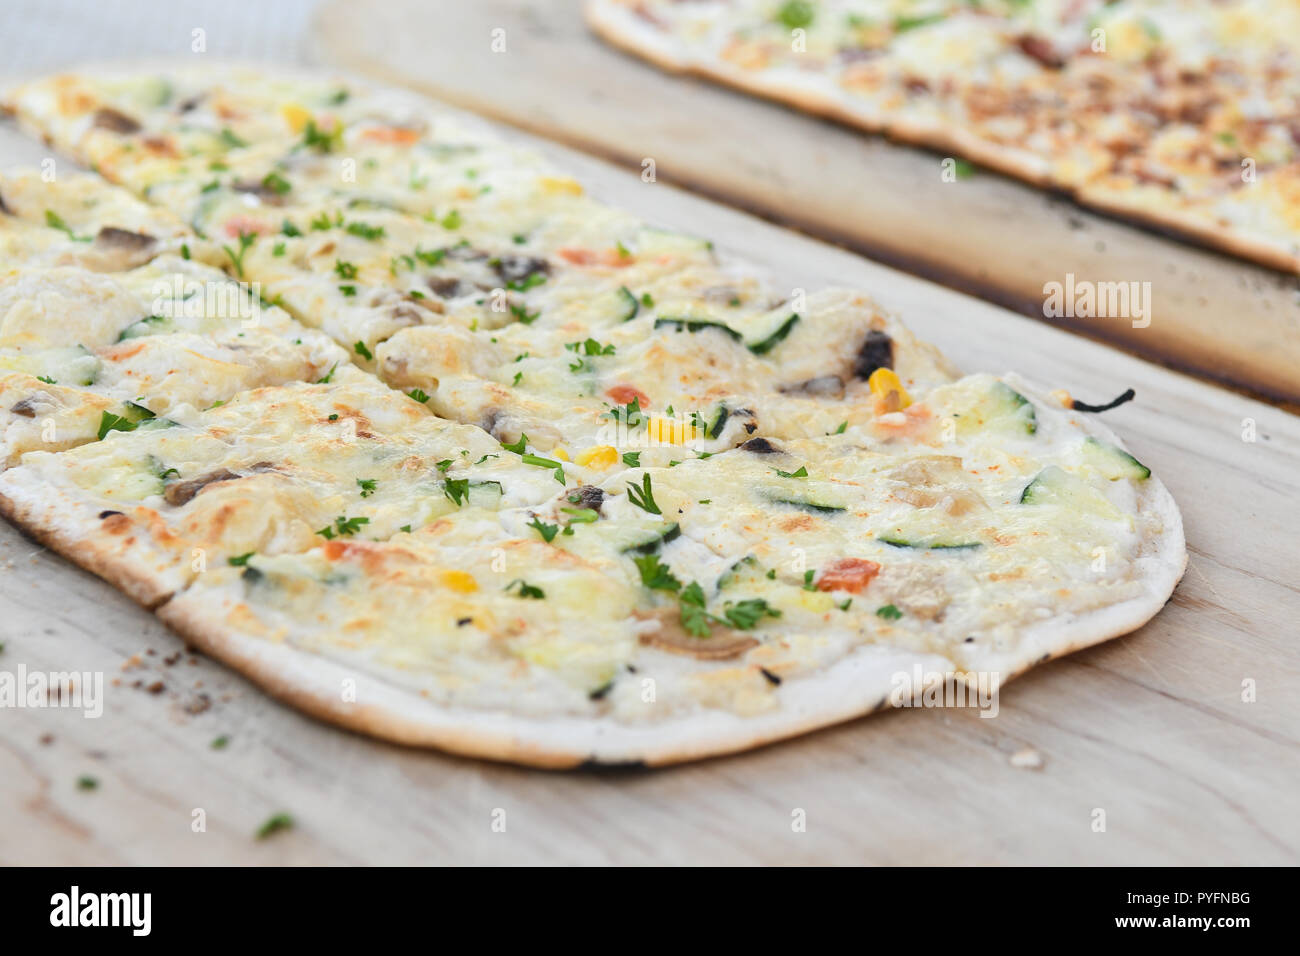 Black Forest speciality called Flammkuchen in south Germany and Tarte flambee in northeast France - vegetarian - on wooden platter Stock Photo